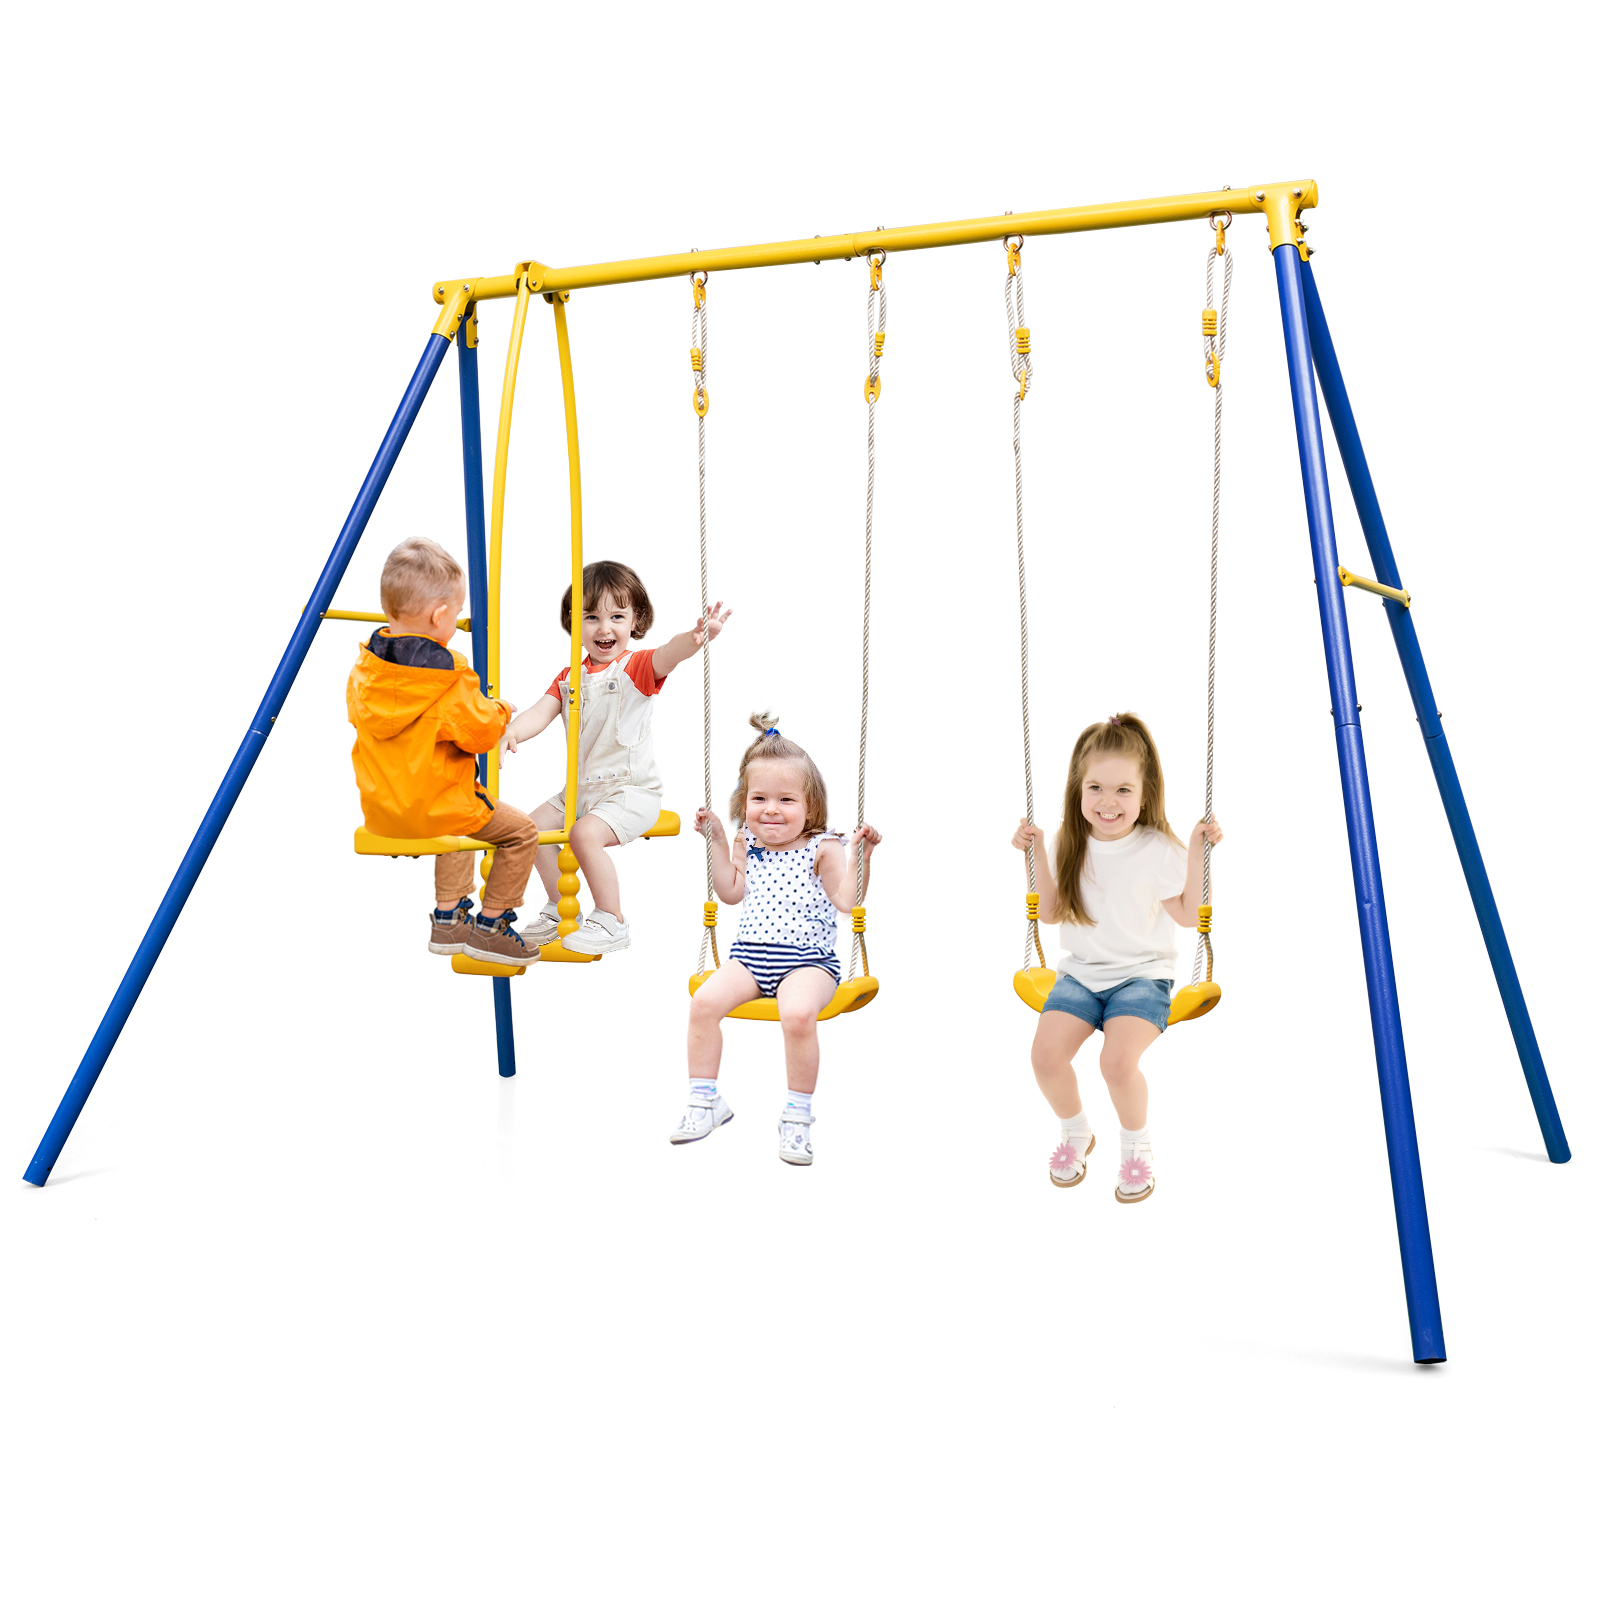 Heavy-Duty Kids Playset with 2 Swing Seats and 2 Glider Seats for Children 3-12 Years Old-Blue